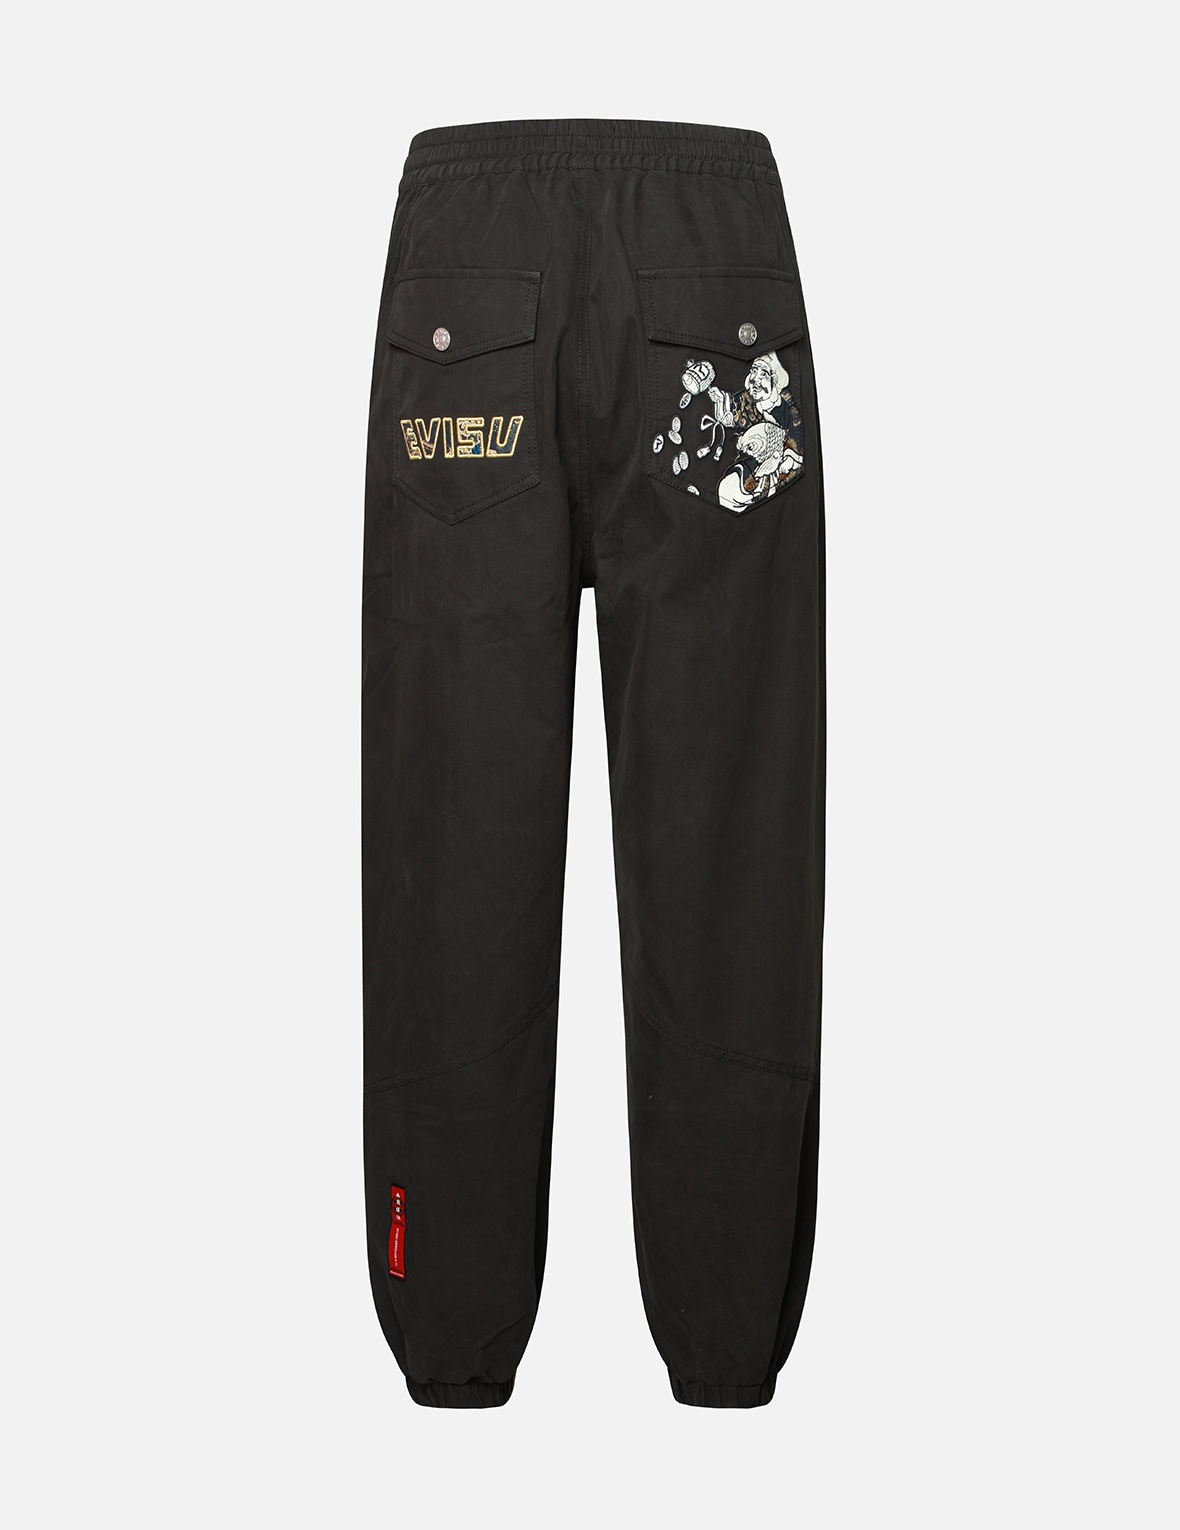 DAIKOKUTEN AND LOGO EMBROIDERY WITH BROCADE APPLIQUÉ LOOSE FIT JOGGER PANTS - 1